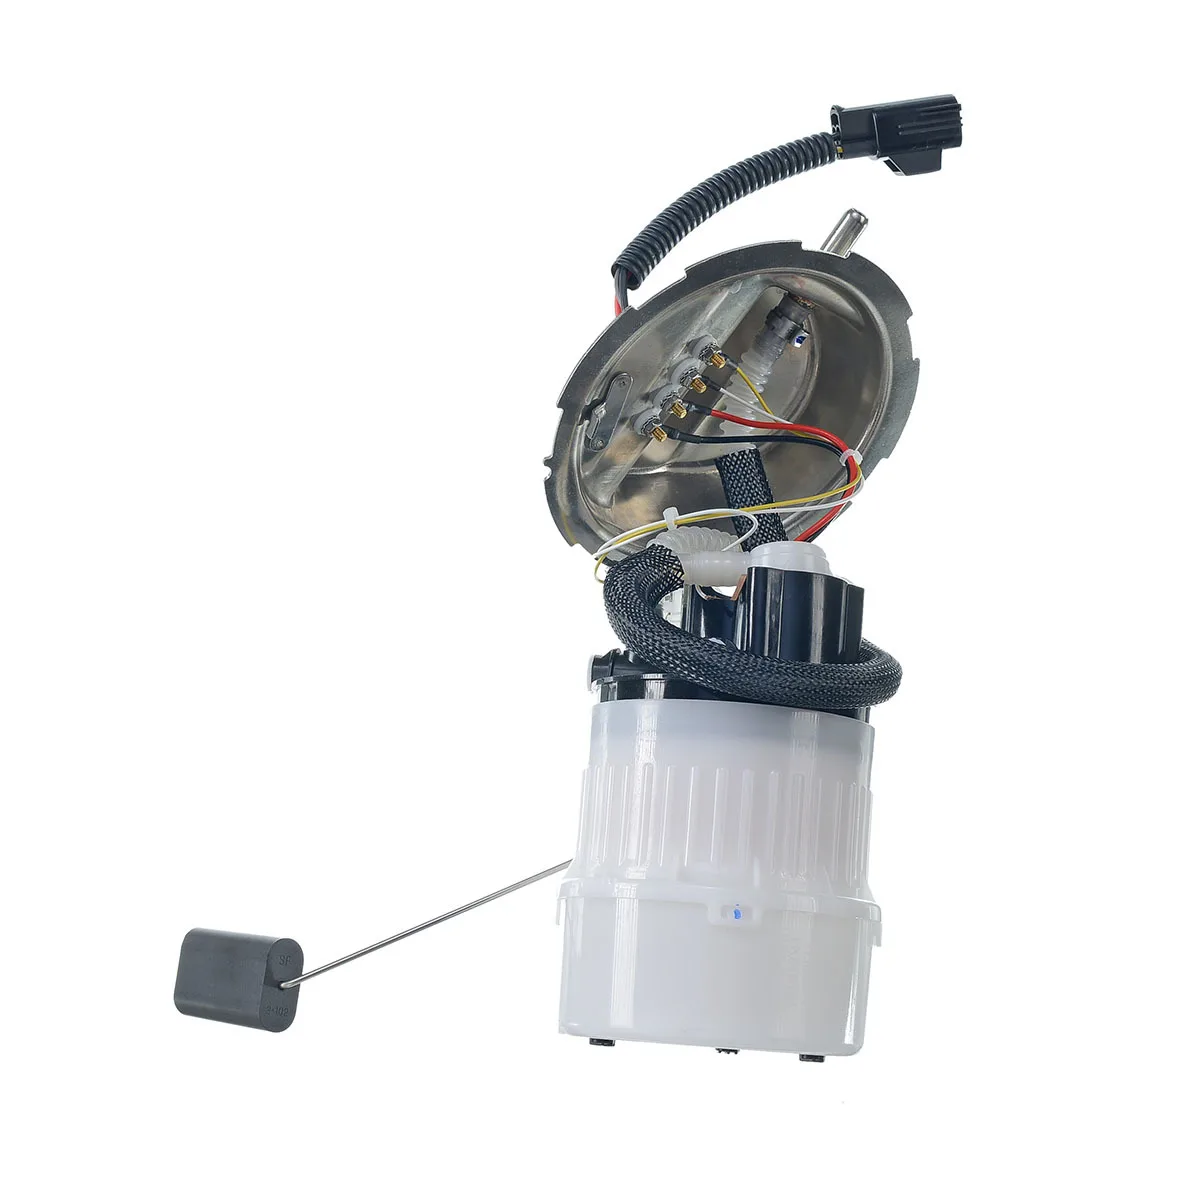 

In-stock CN US New Electrical Fuel Pump Module Assembly for Mazda 3 L4 2.0L 2004-2009 E8589M E8589M